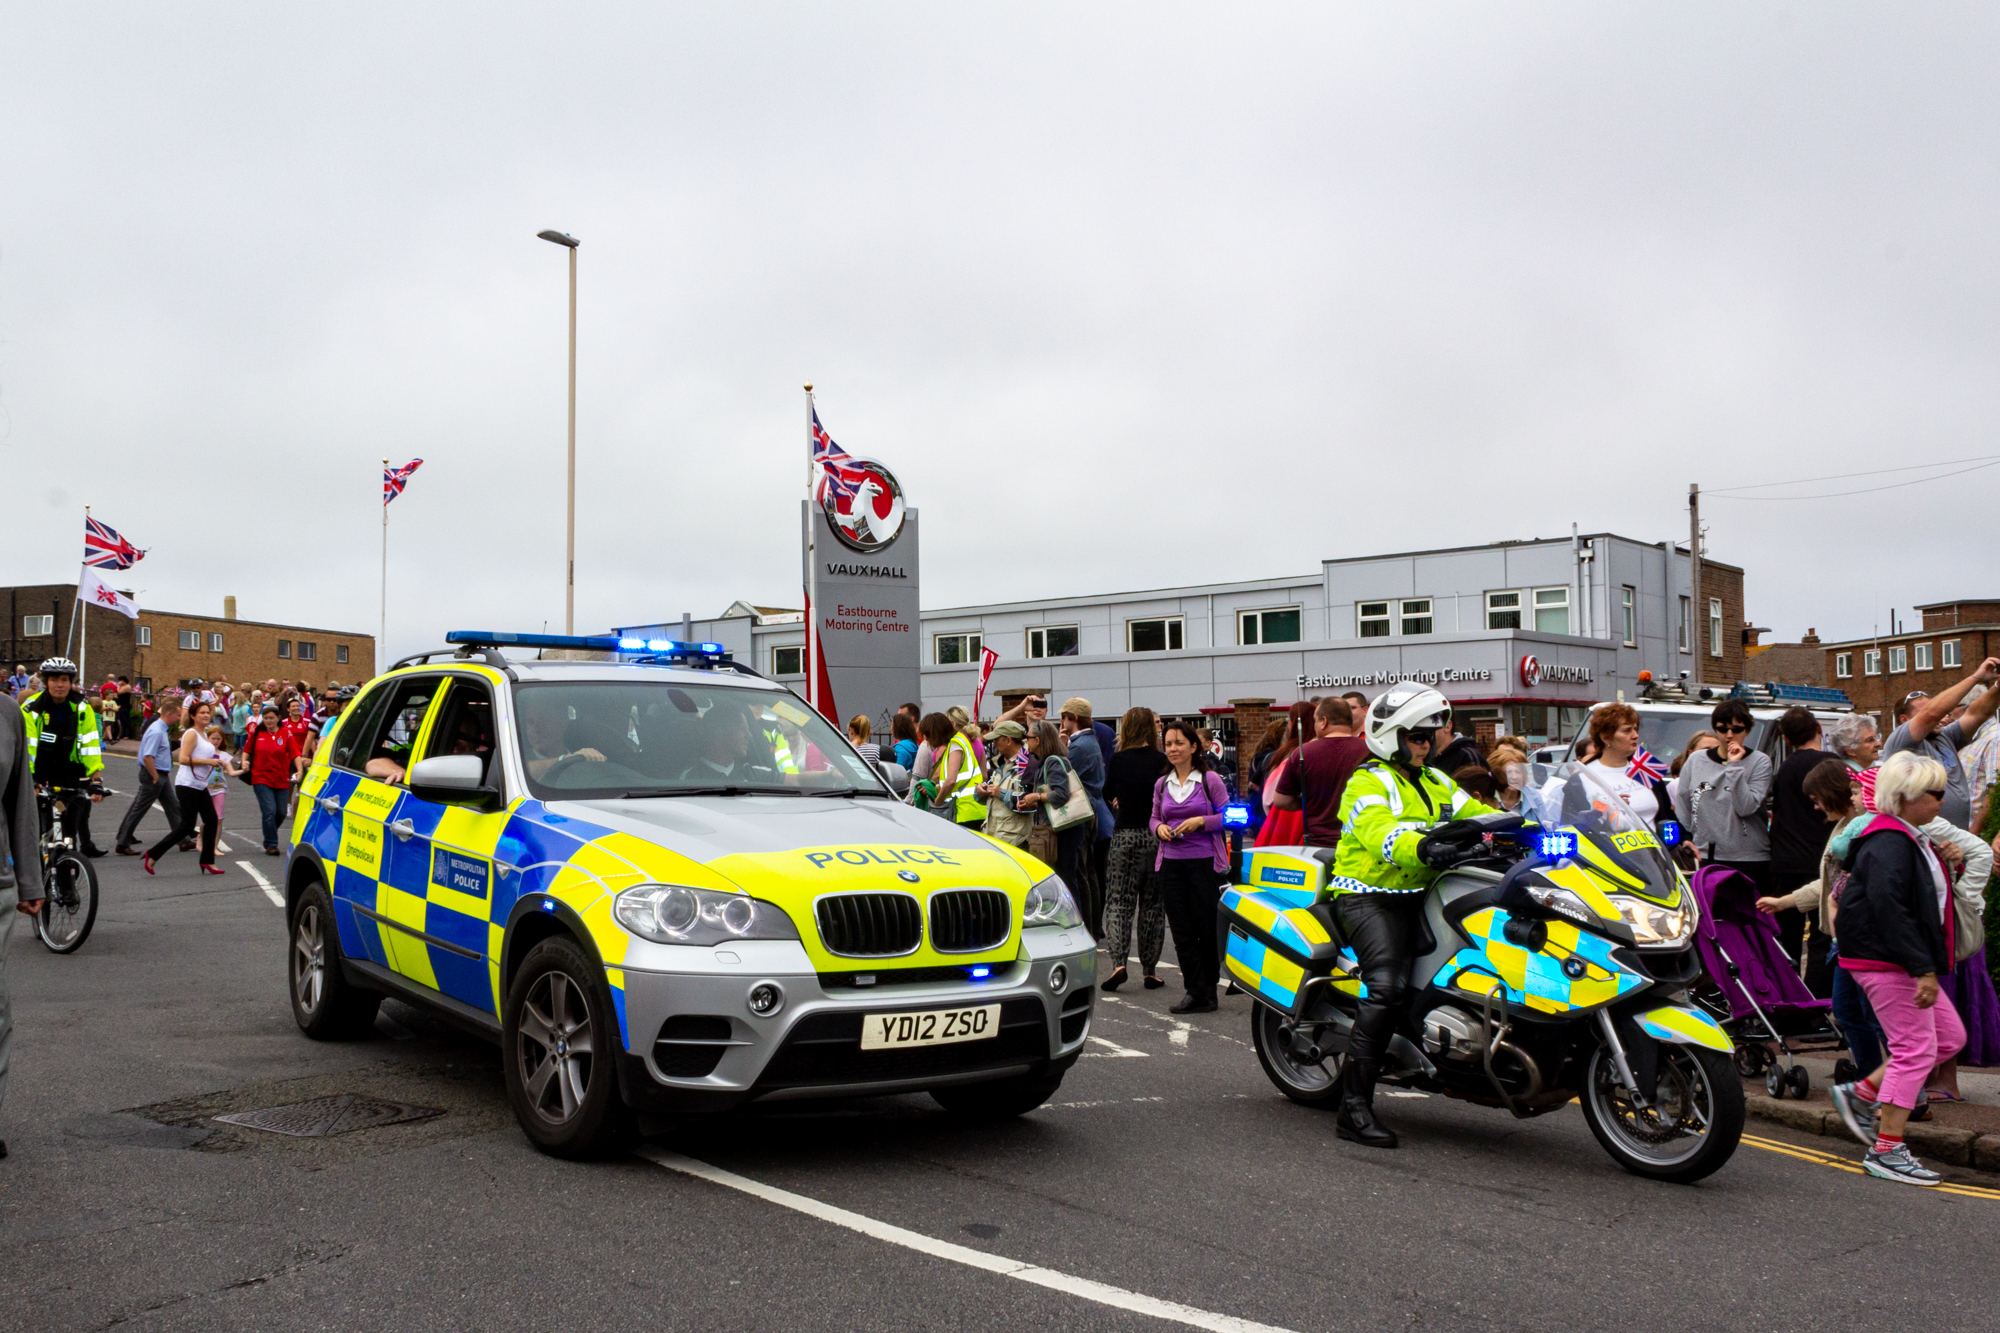 Olympic Torch Relay 2012 - Police Vehicles - Bicycle, Car and Motorbike